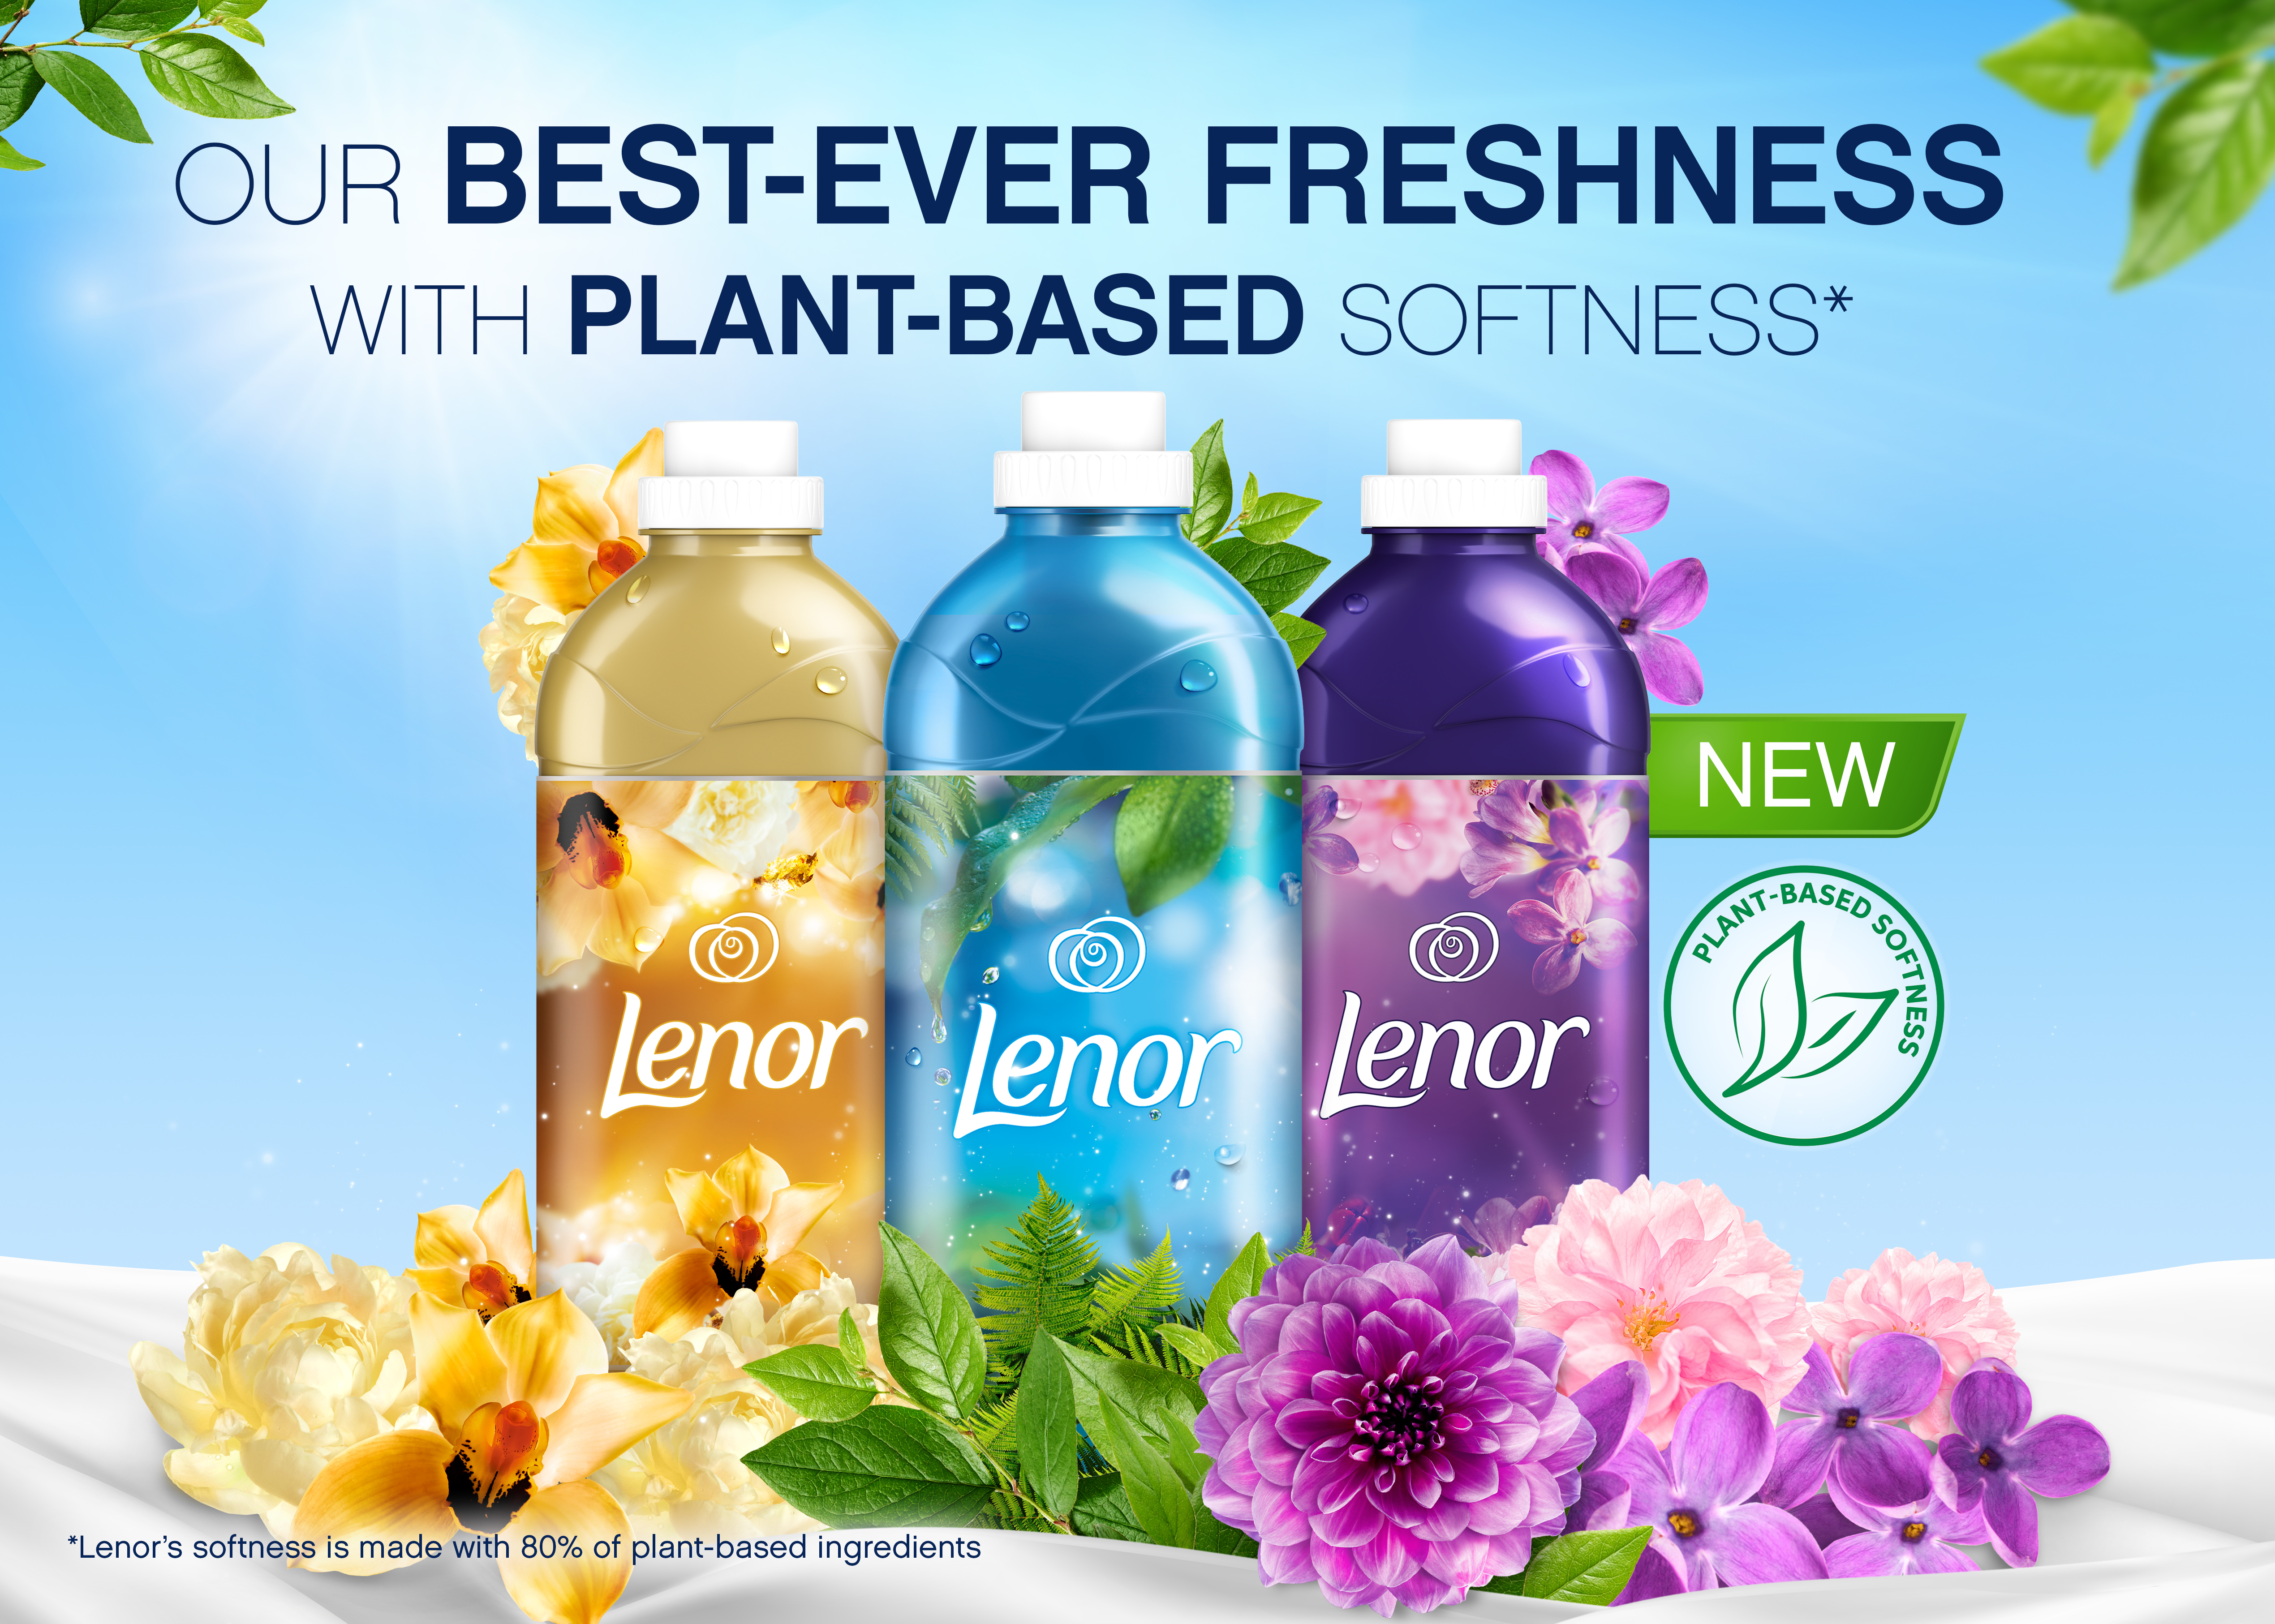 Product Story for Lenor